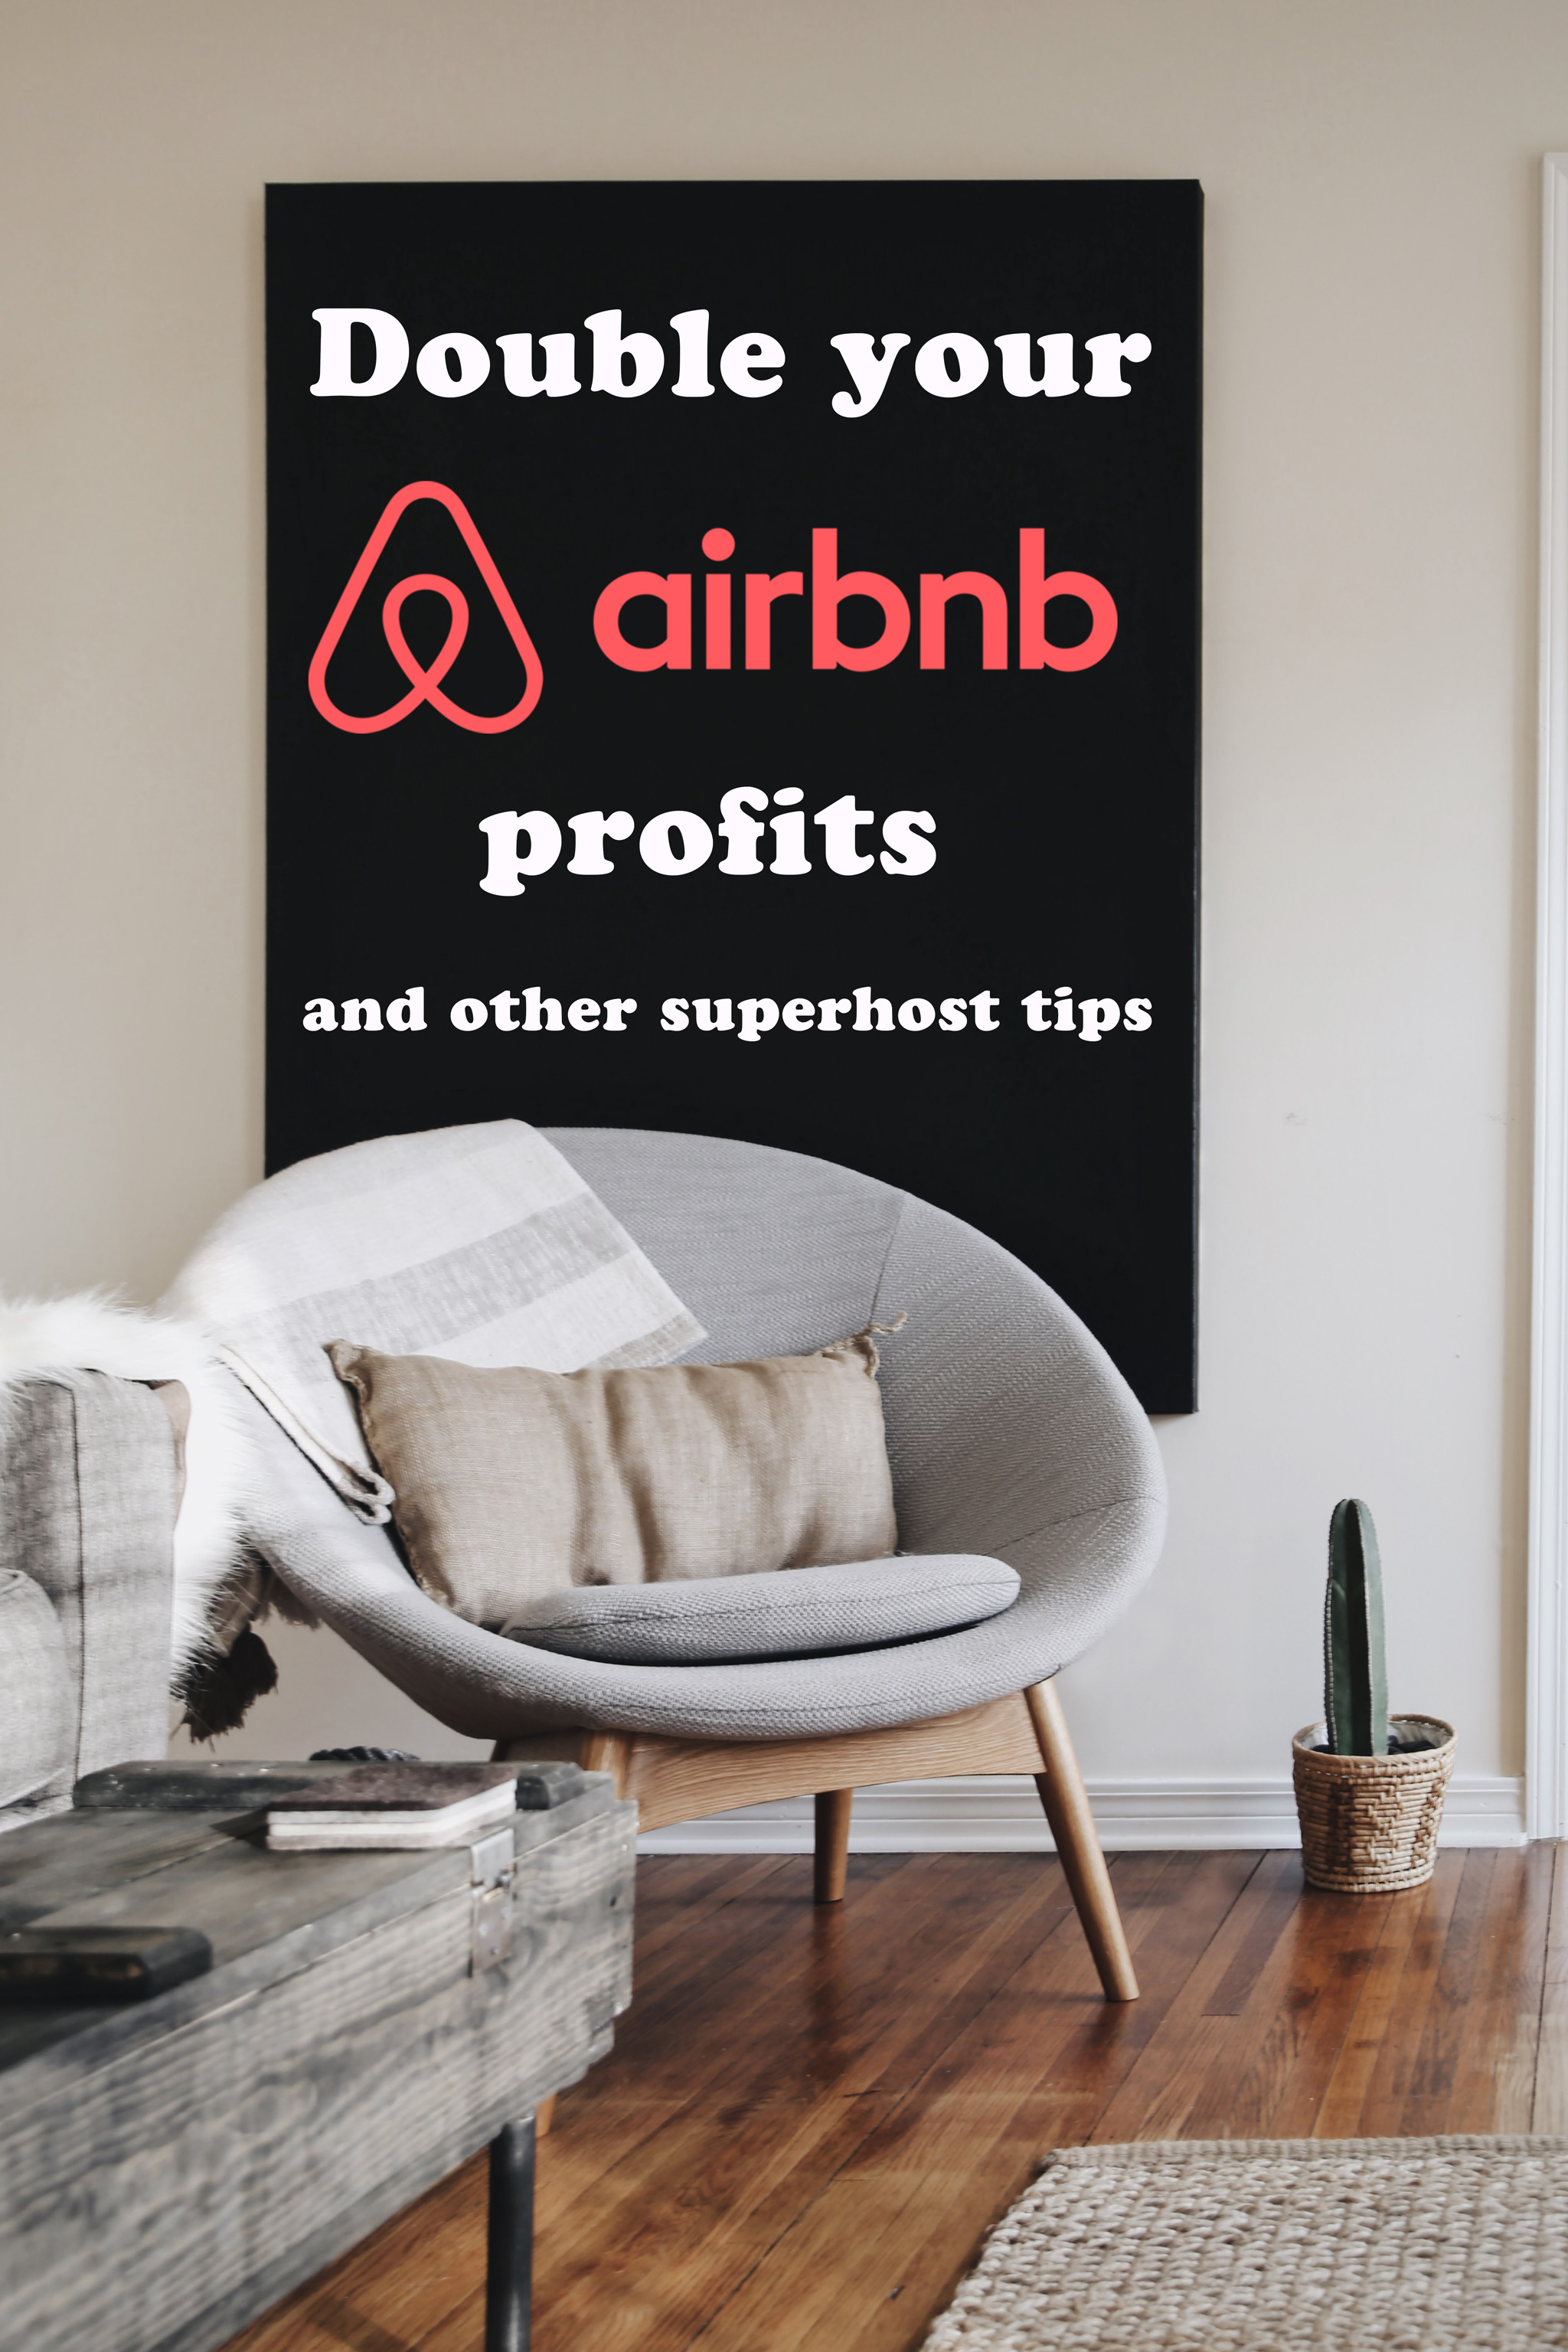 Double your airbnb profits